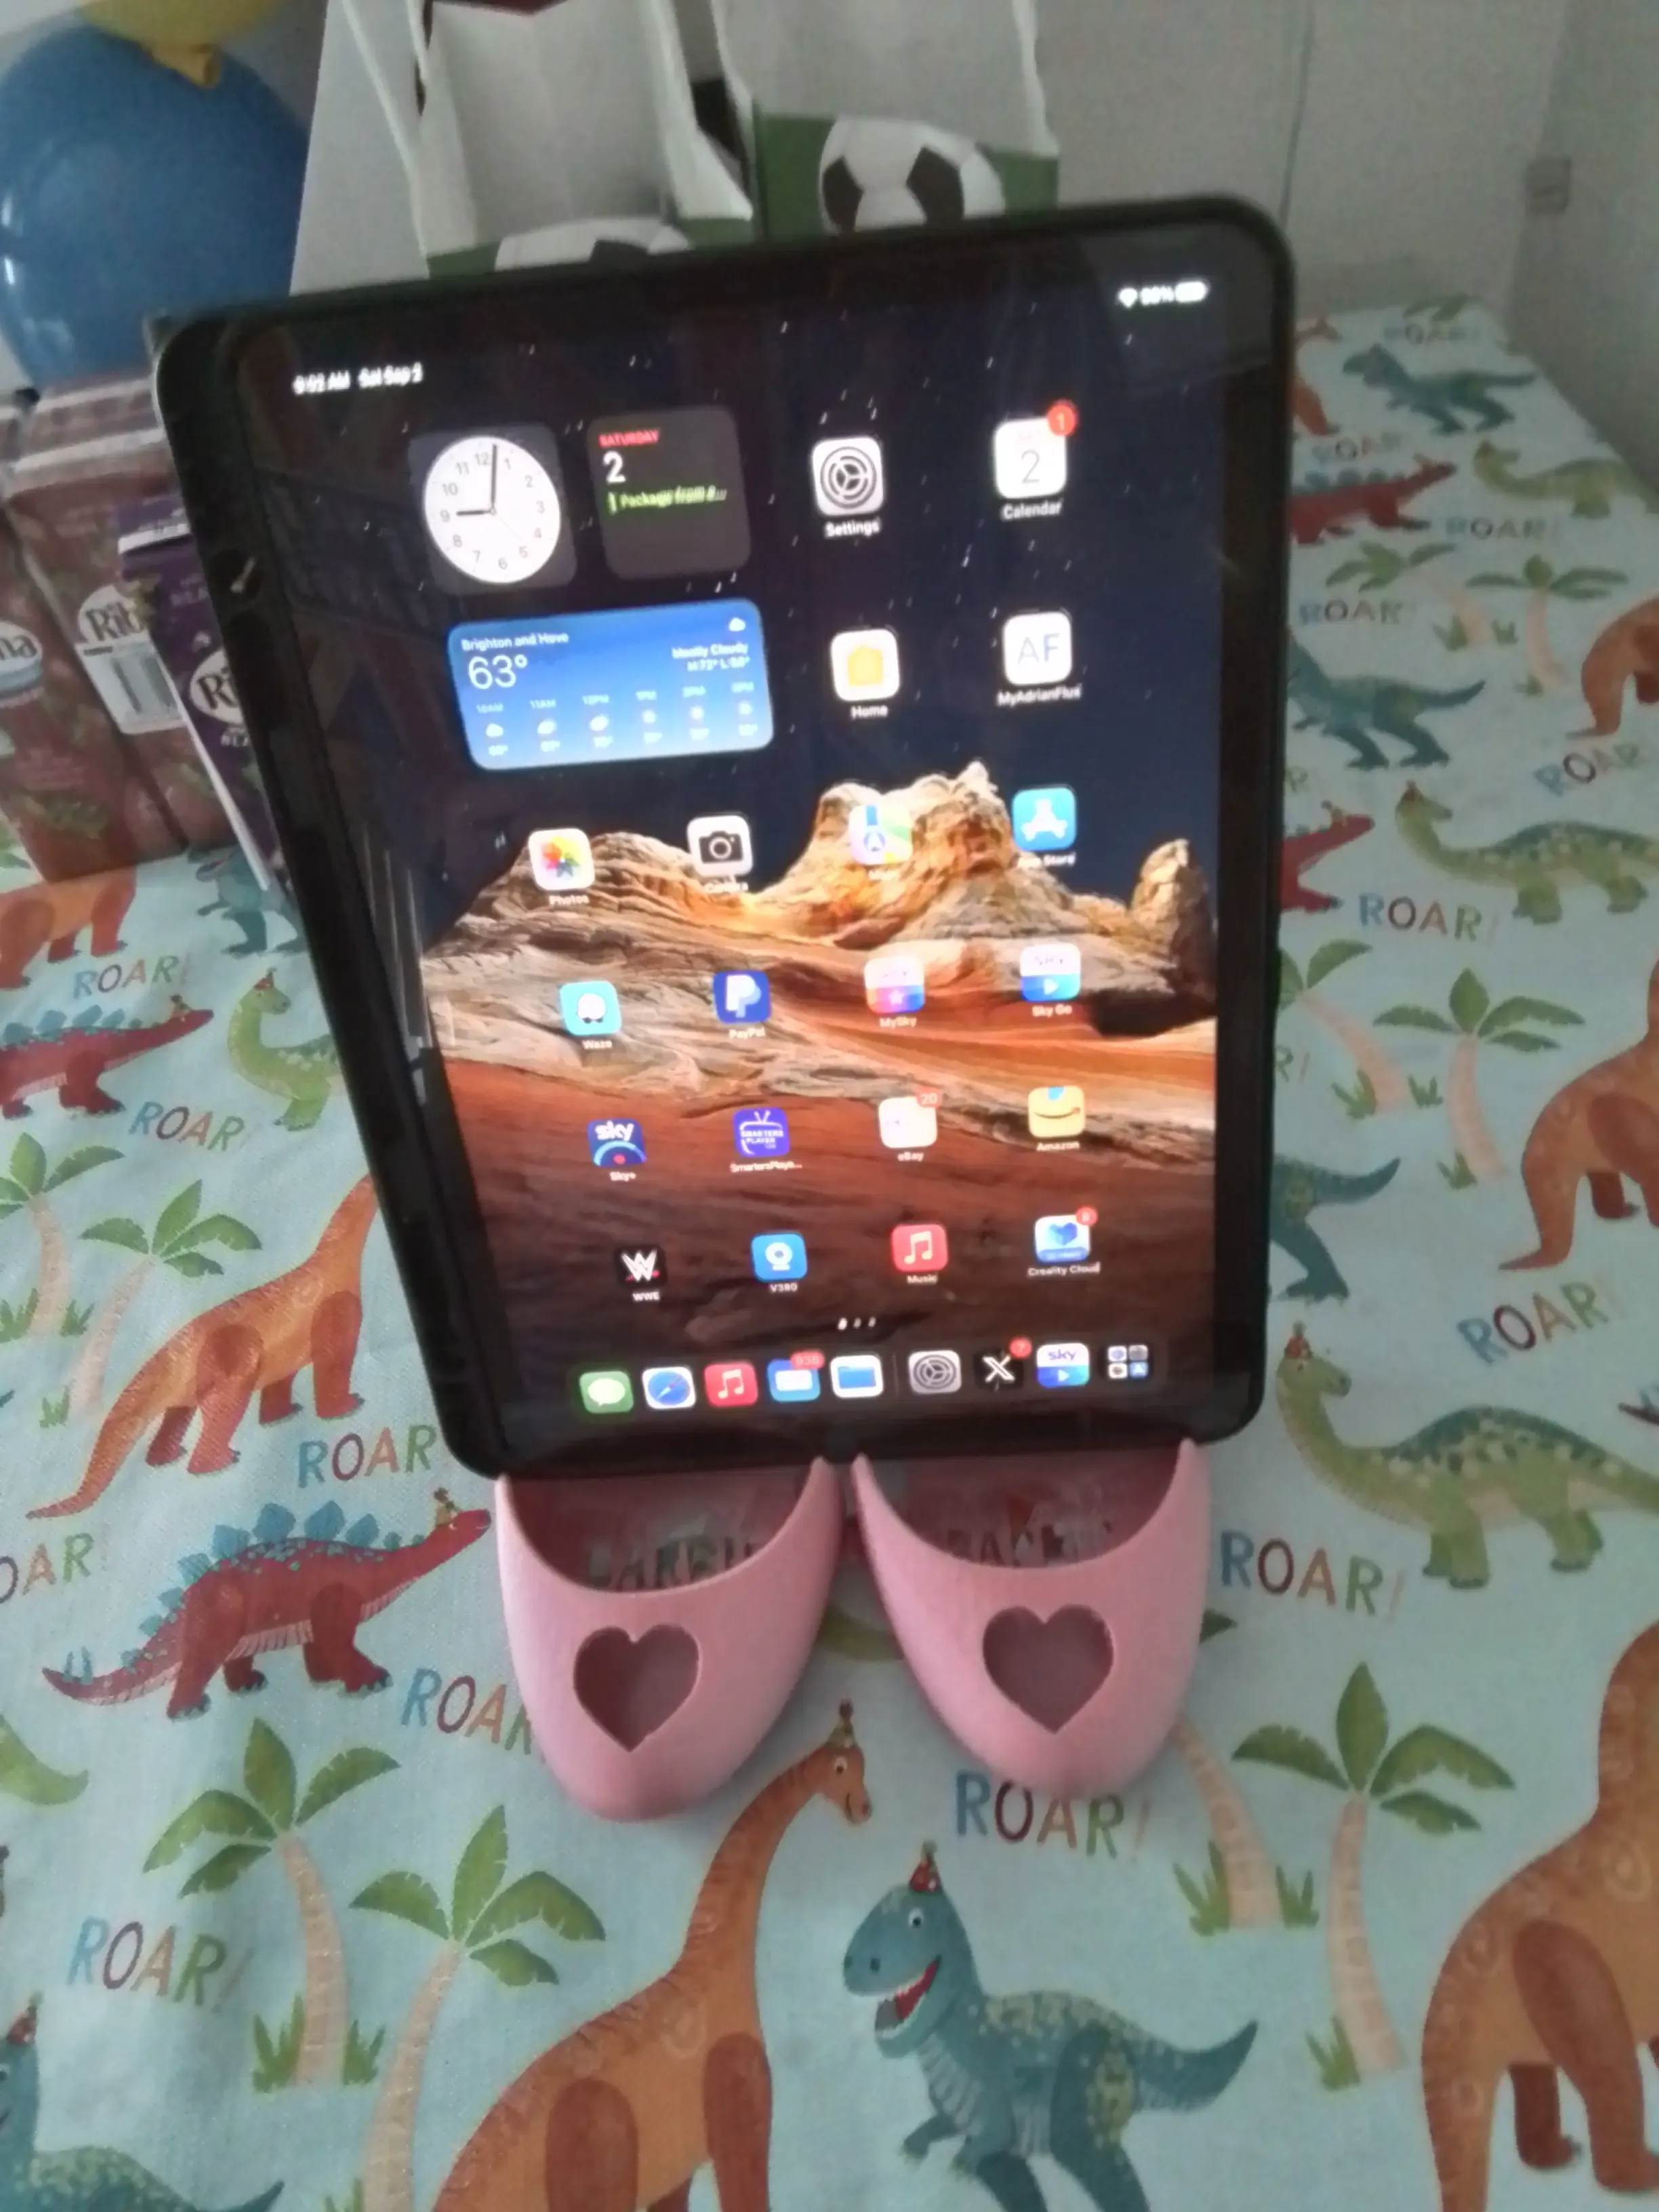 Barbie shoes tablet support